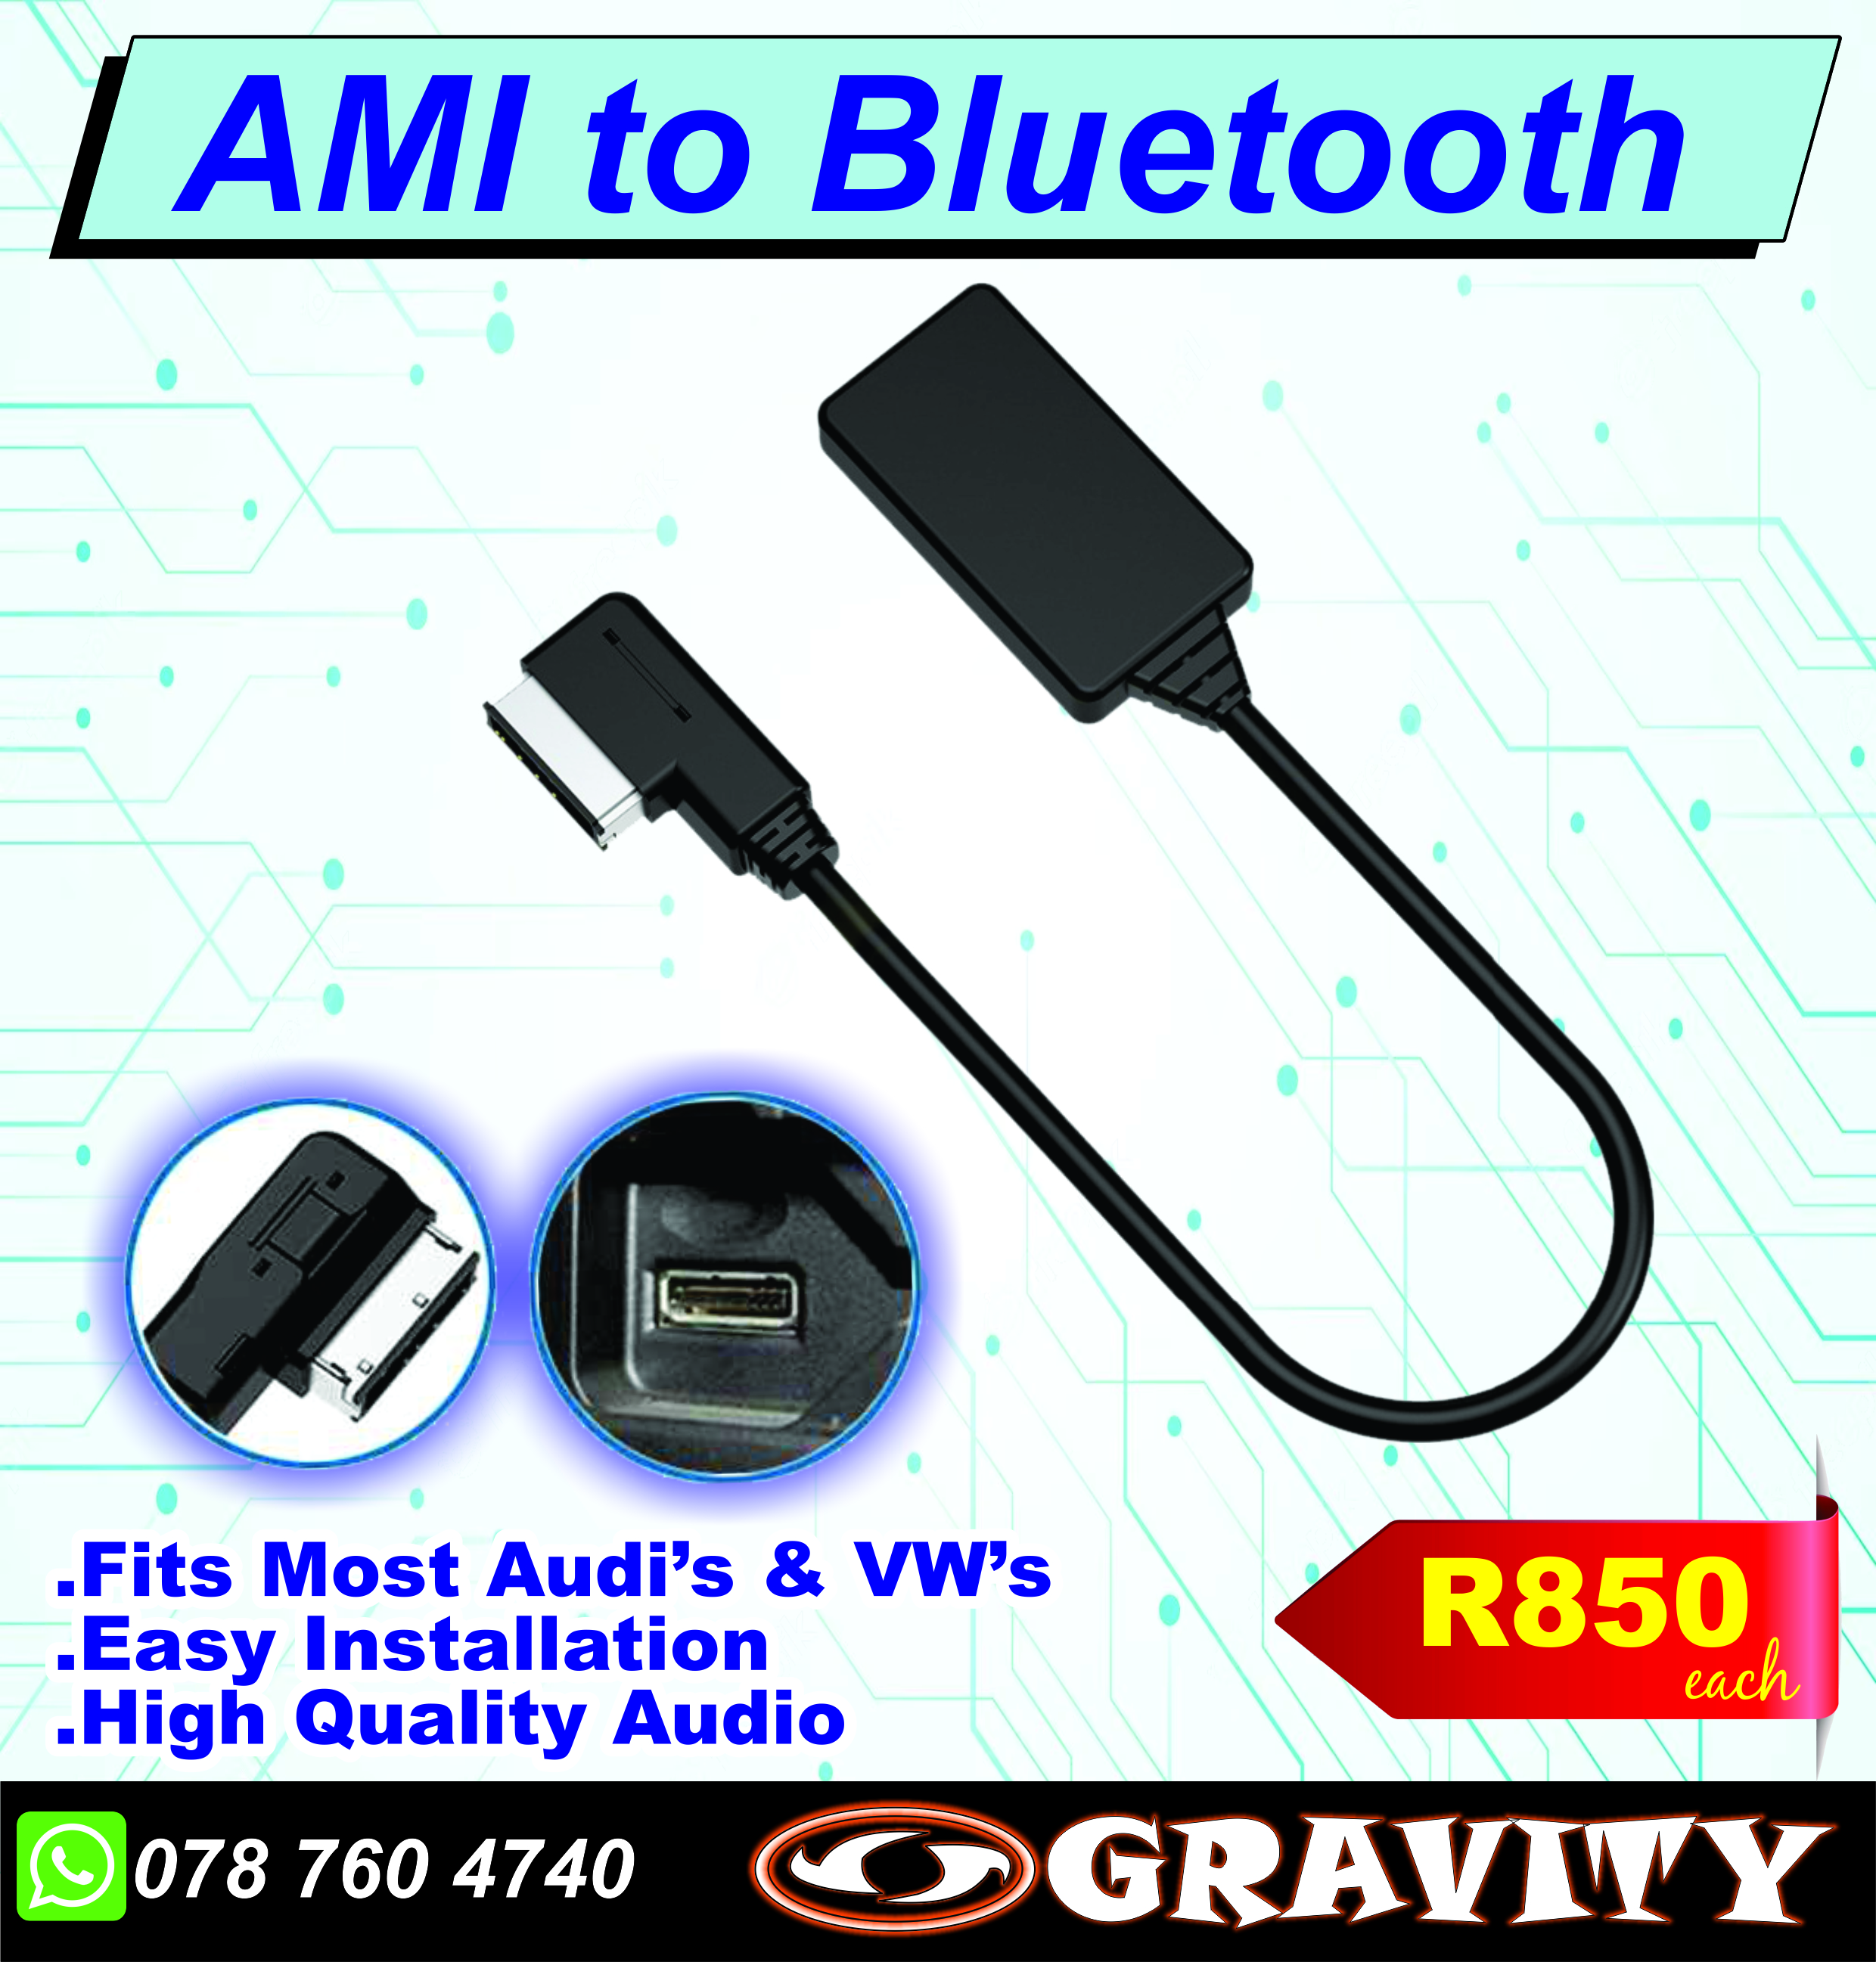 vw ami cable | audi ami cable | usb ami cable | bluetooth ami cable durban gravity